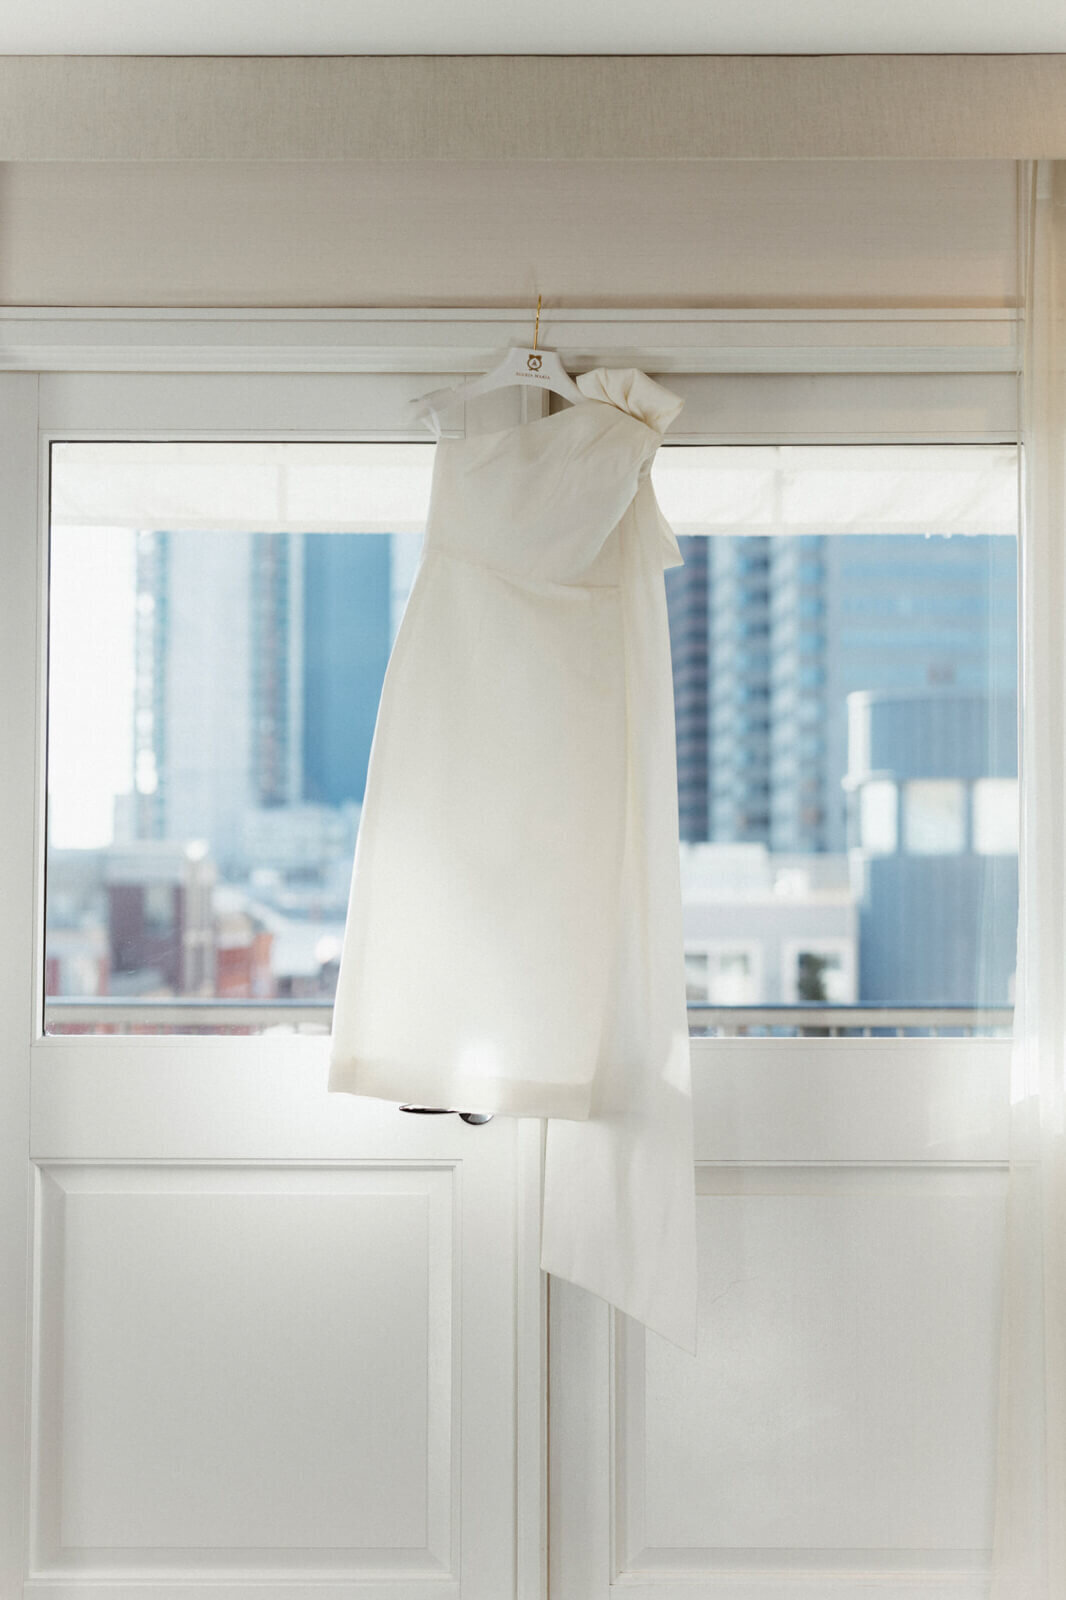 A wedding dress hanging in a window with a view of many buildings outside